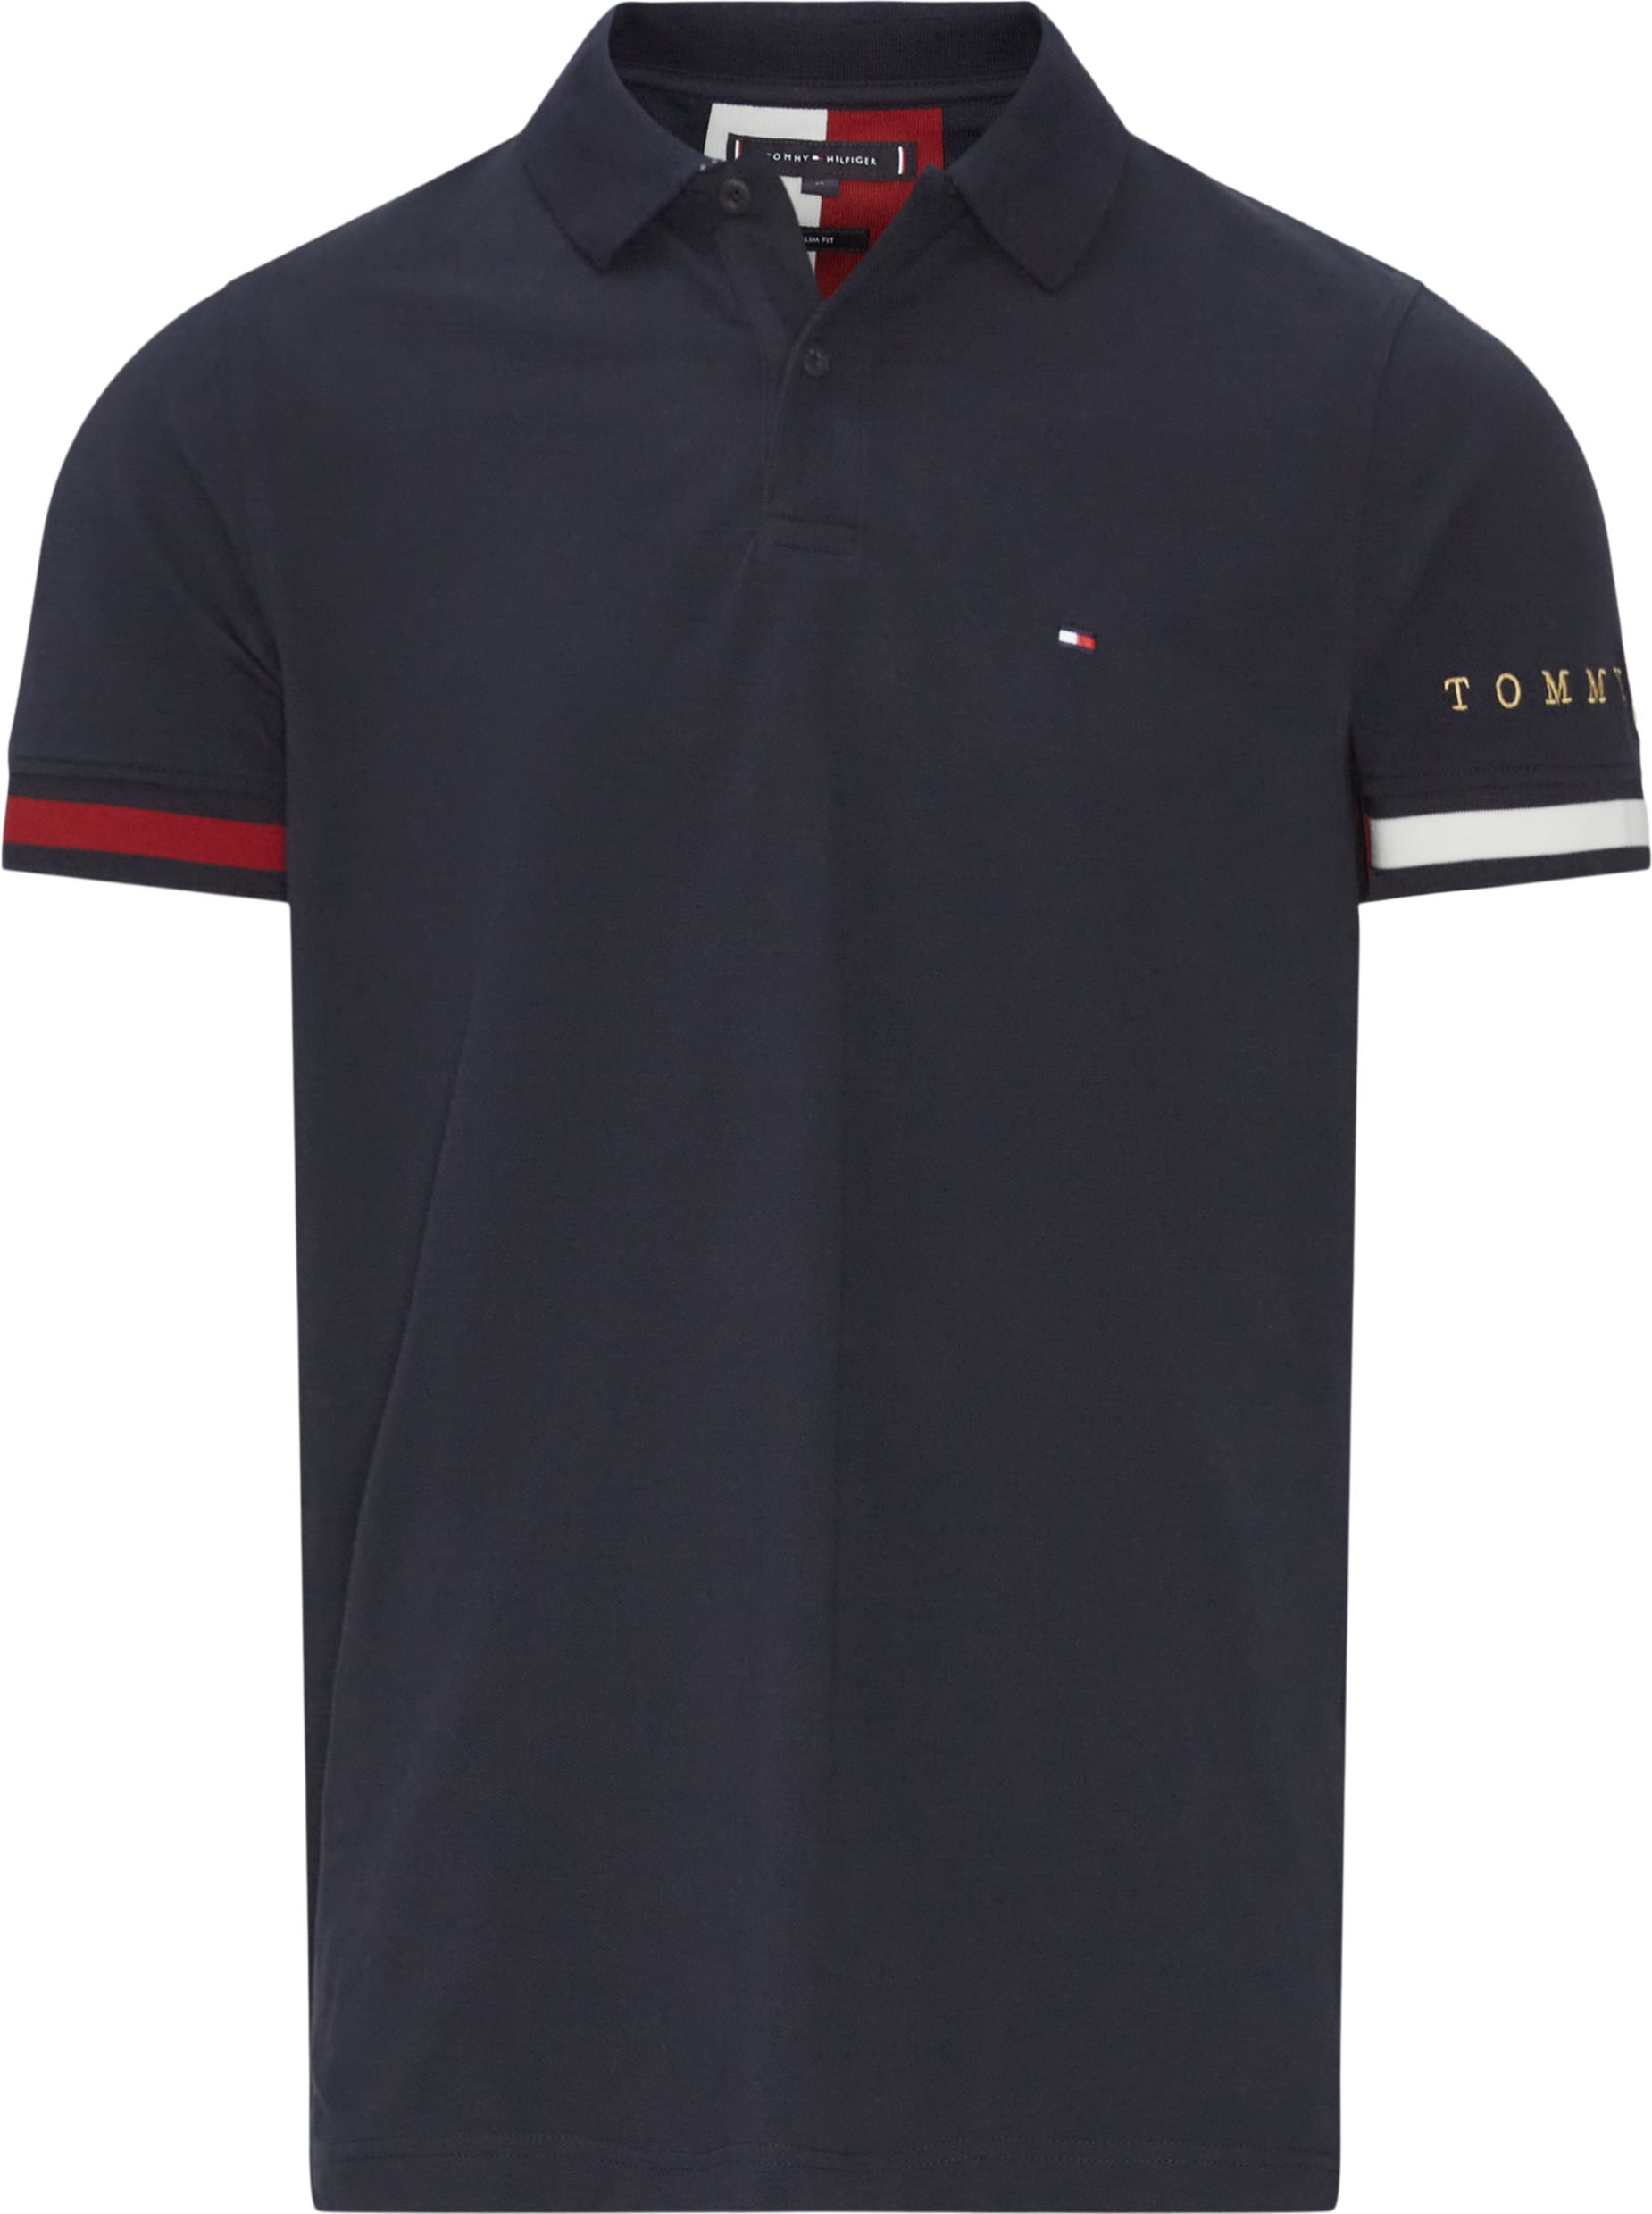 23961 ICON FLAG CUFF SLIM POLO T-shirts NAVY from Tommy Hilfiger 67 EUR